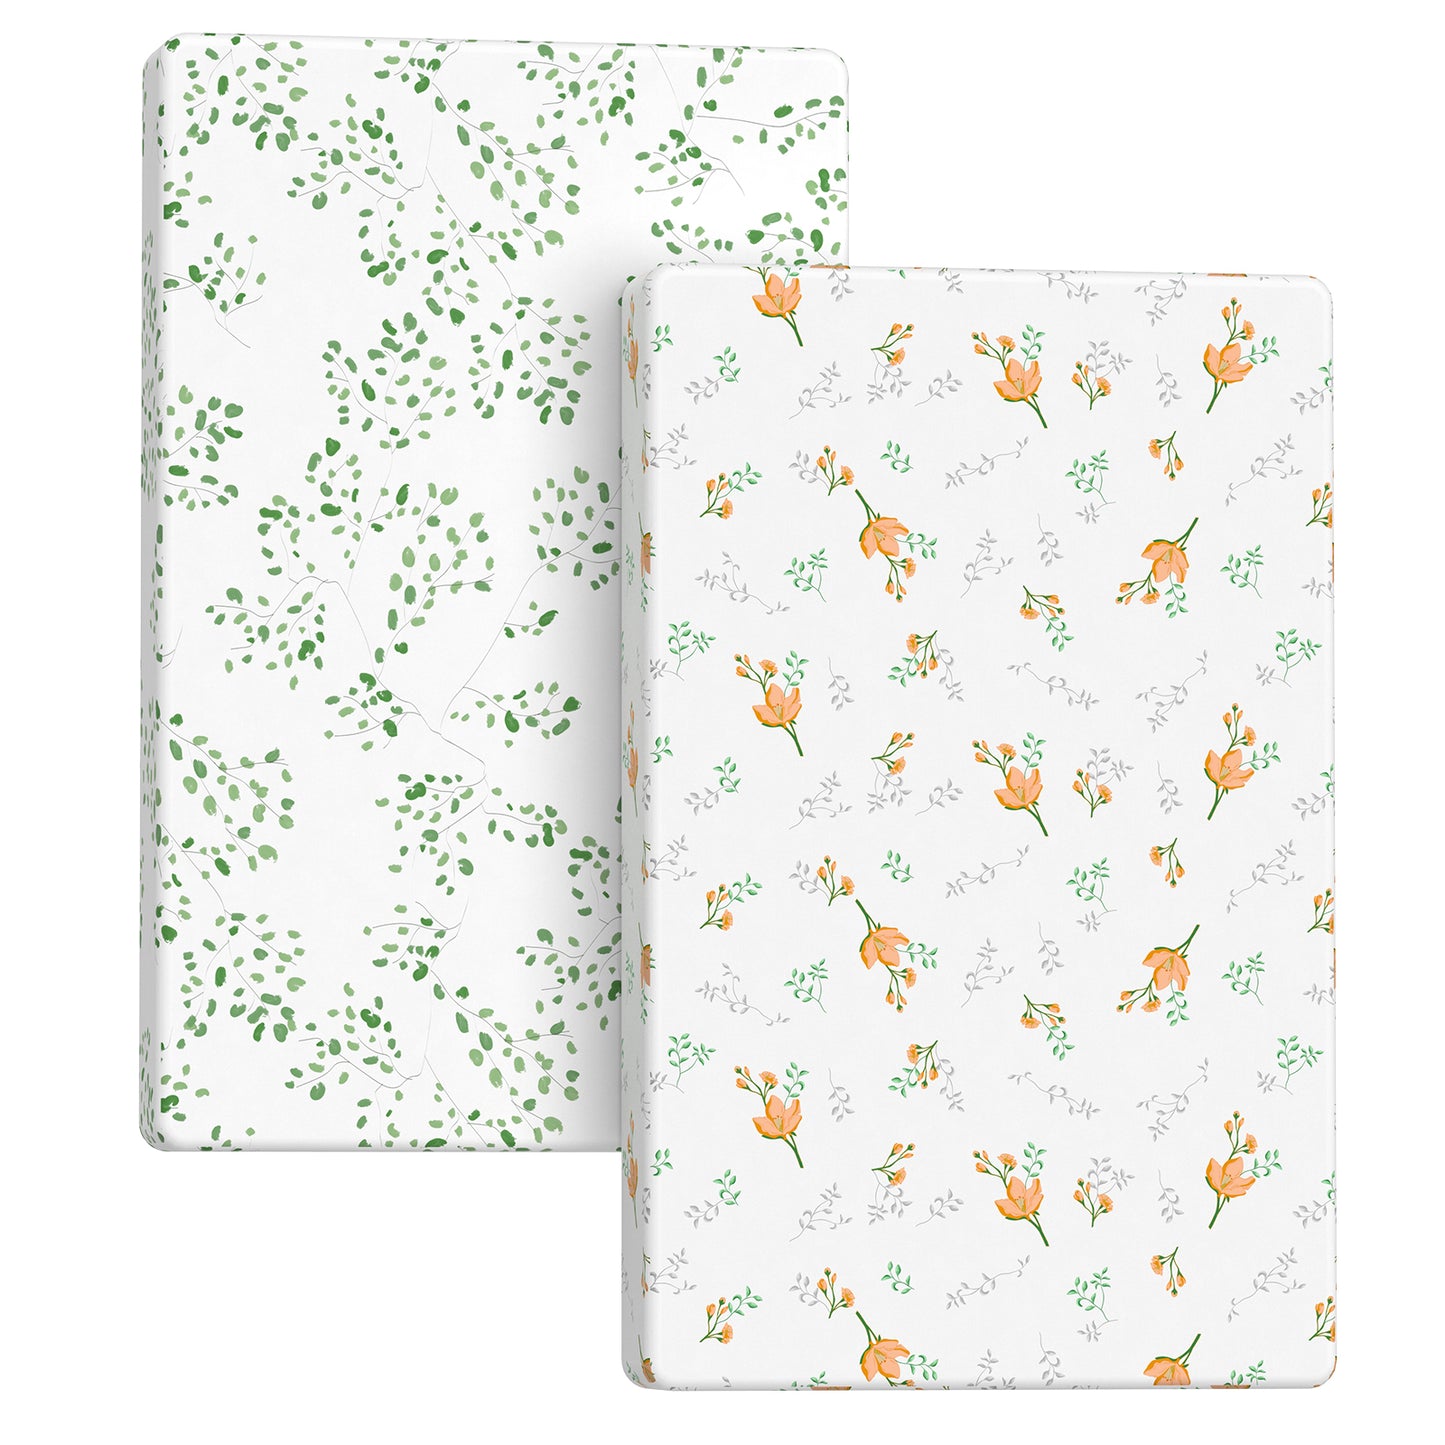 Bedding Sheet for Baby and Infant | Green Plant Themed Design , 4 Sizes Available